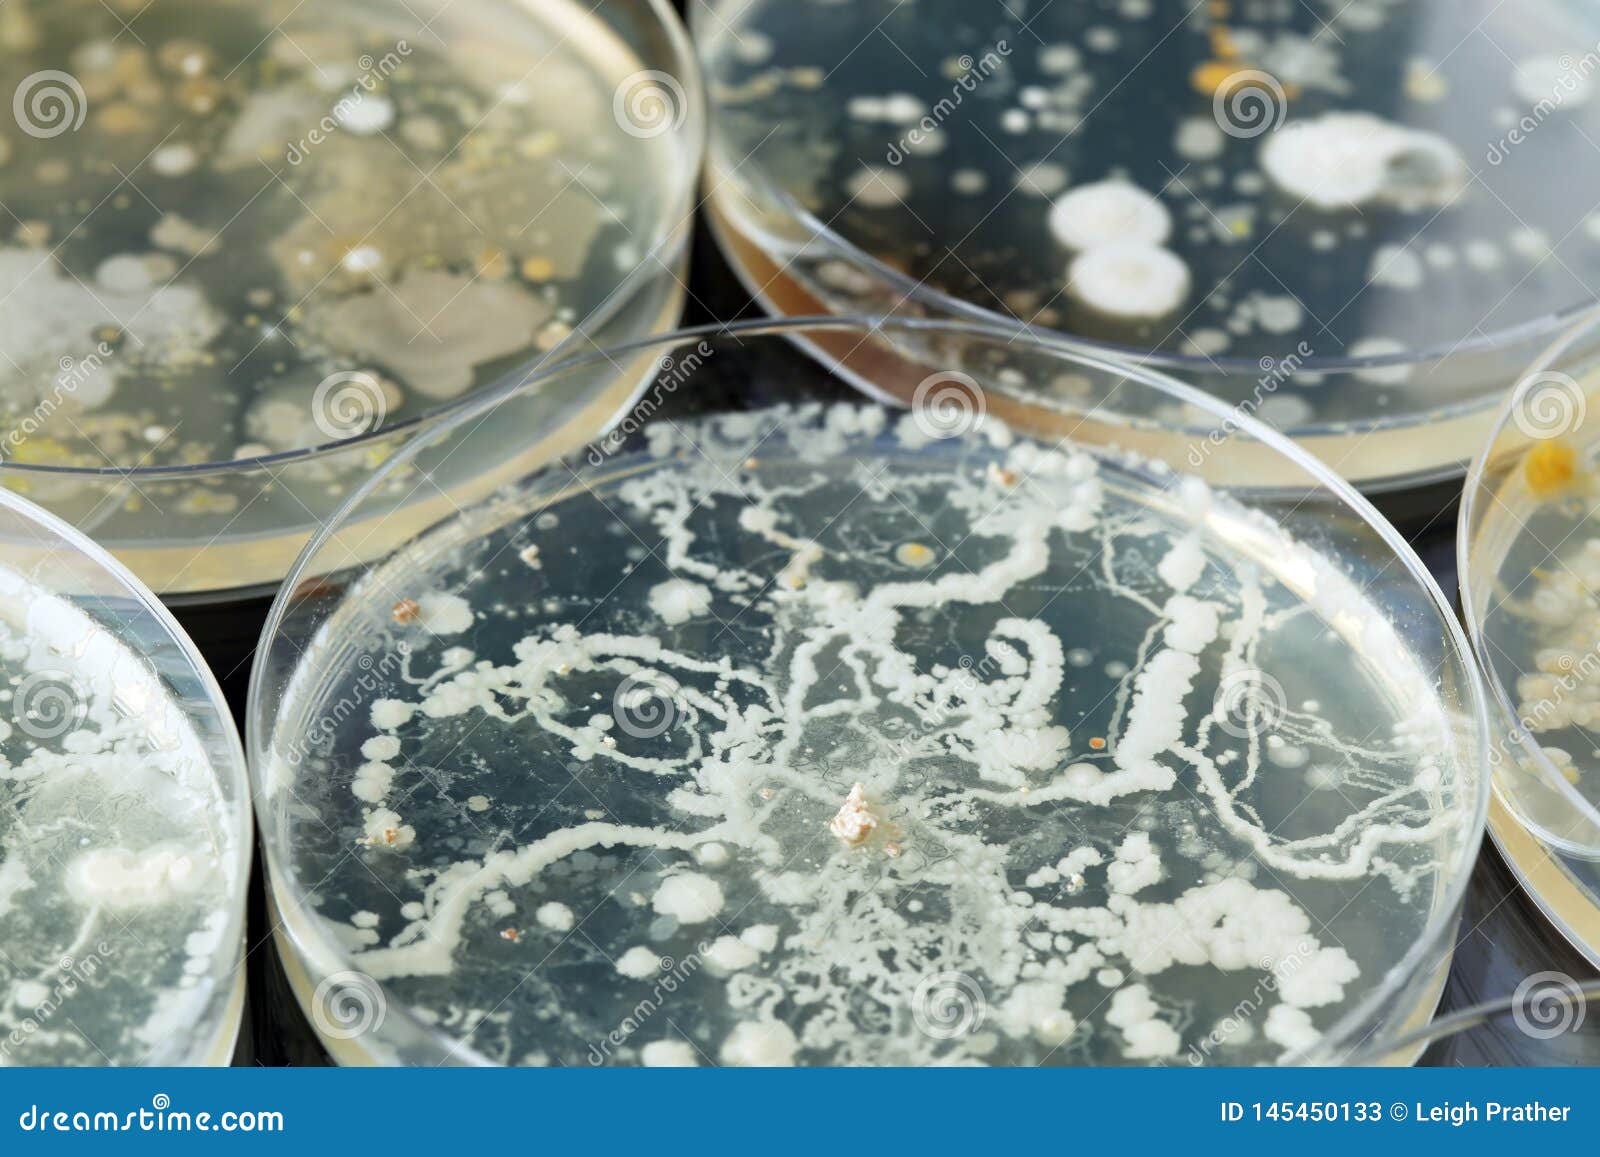 Competition: Microorganisms In A Petri Dish